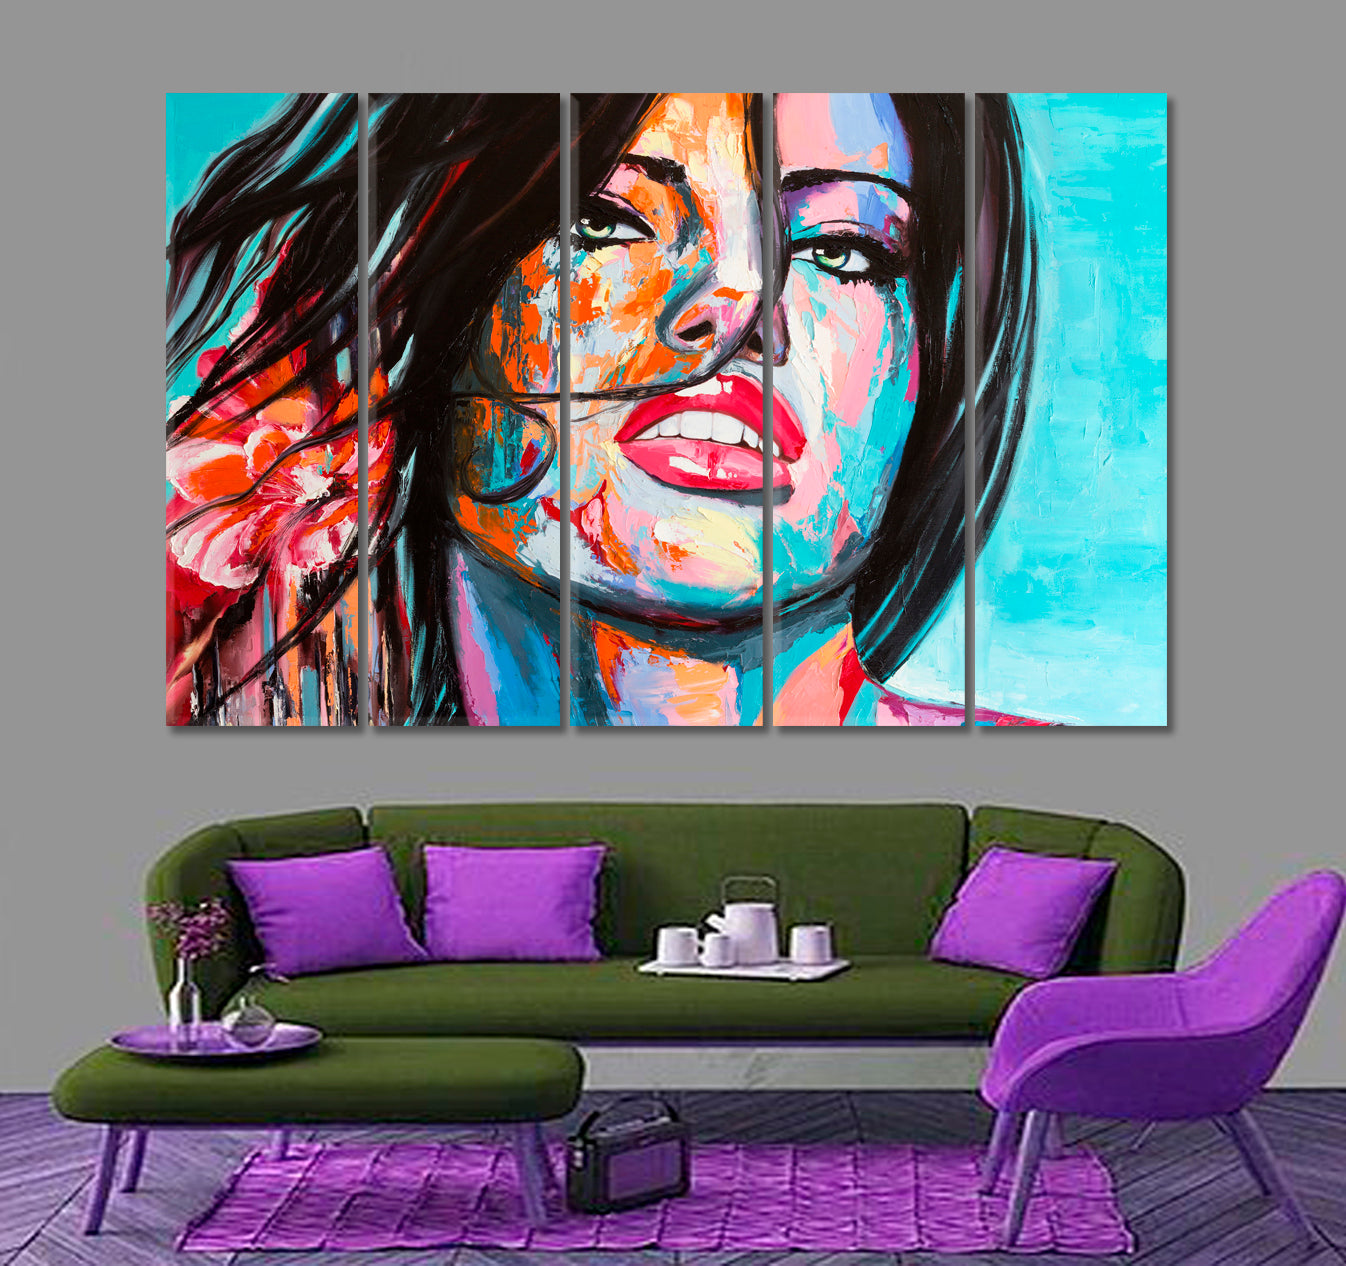 COLORFUL EMOTIONS Charming Young Woman Fantasy Girl Pop Art Style Trendy Art People Portrait Wall Hangings Artesty 5 panels 36" x 24" 